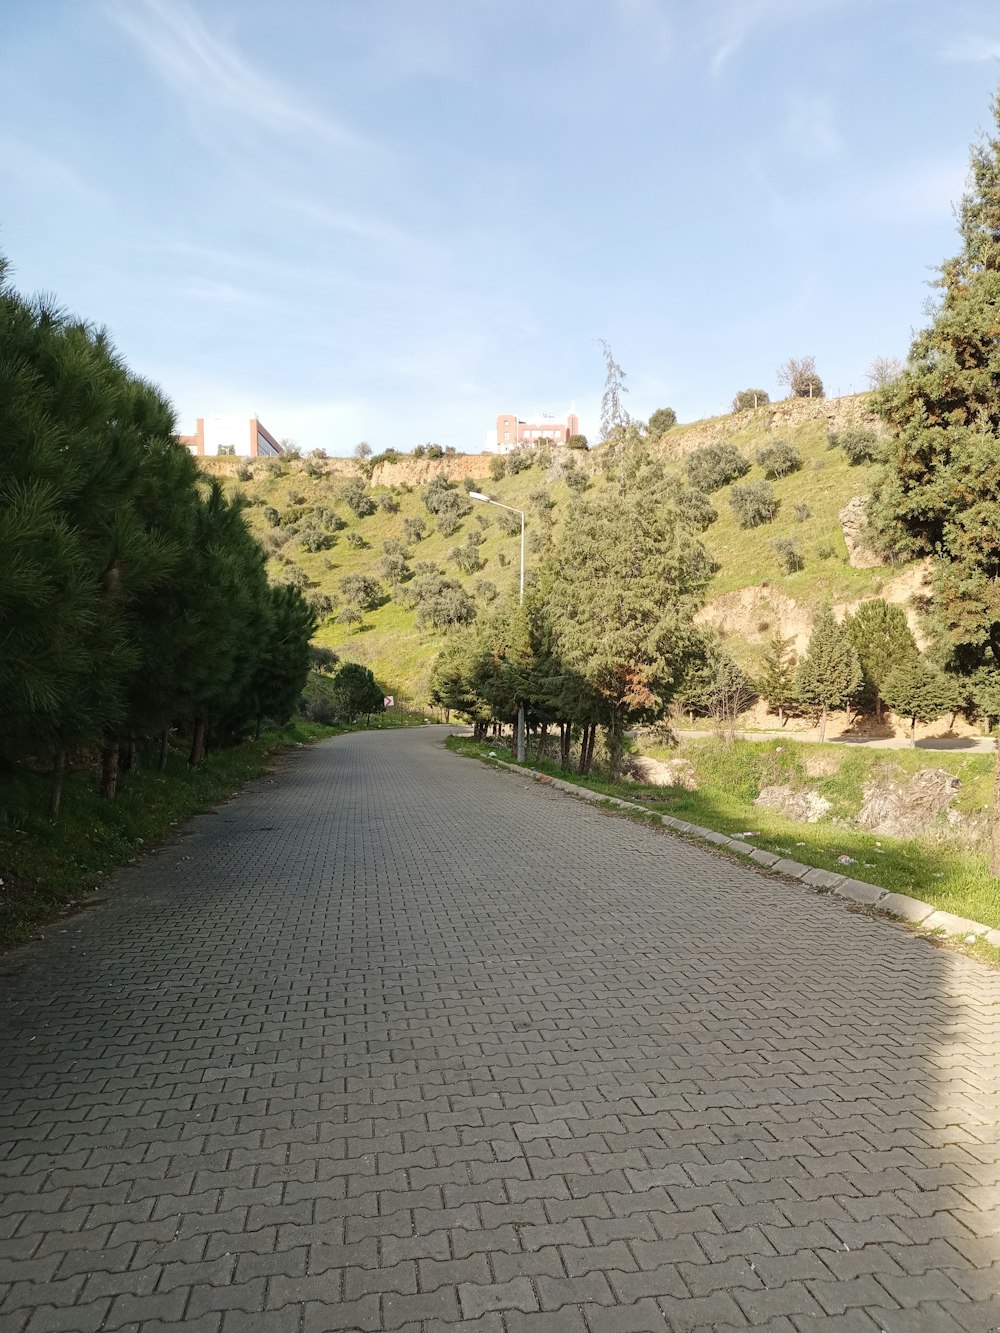 a paved road with trees and a hill in the background